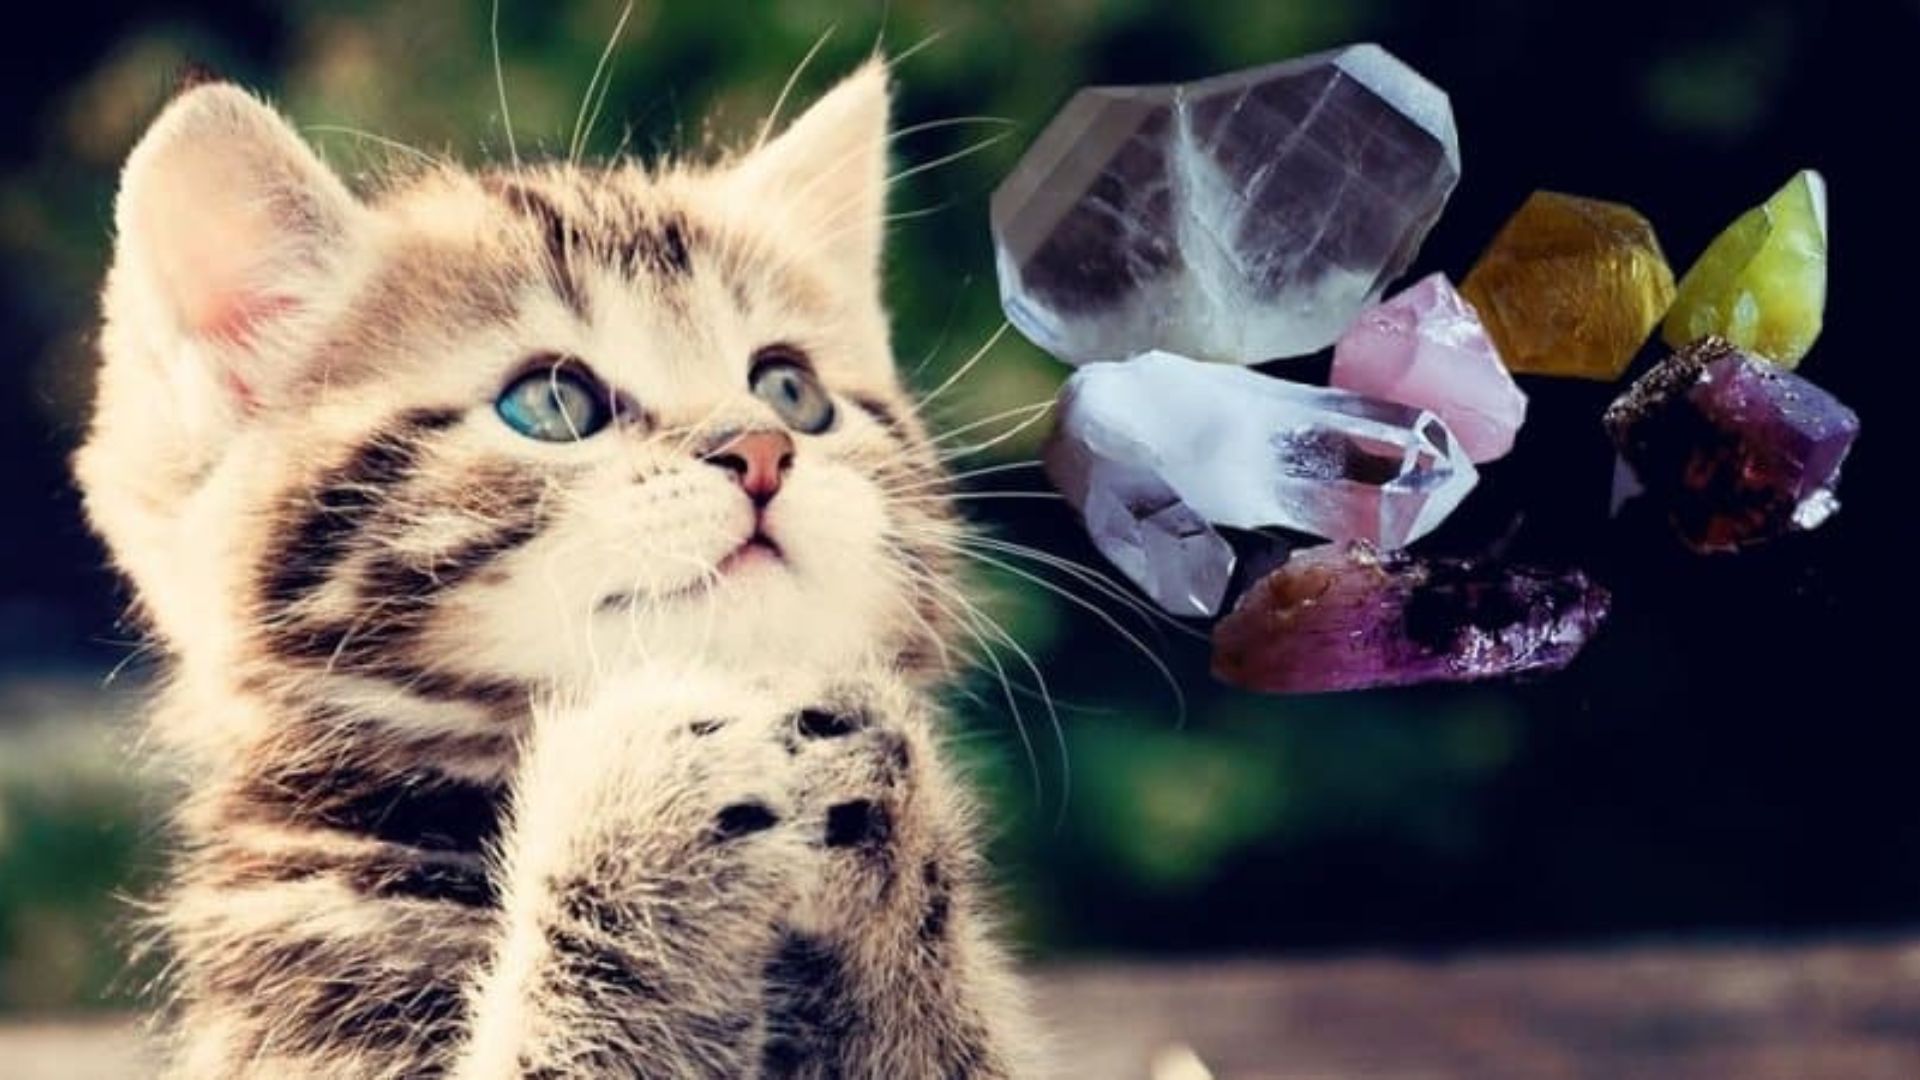 What Is The Use Of Gemstones In Pet Therapy And Animal Healing?